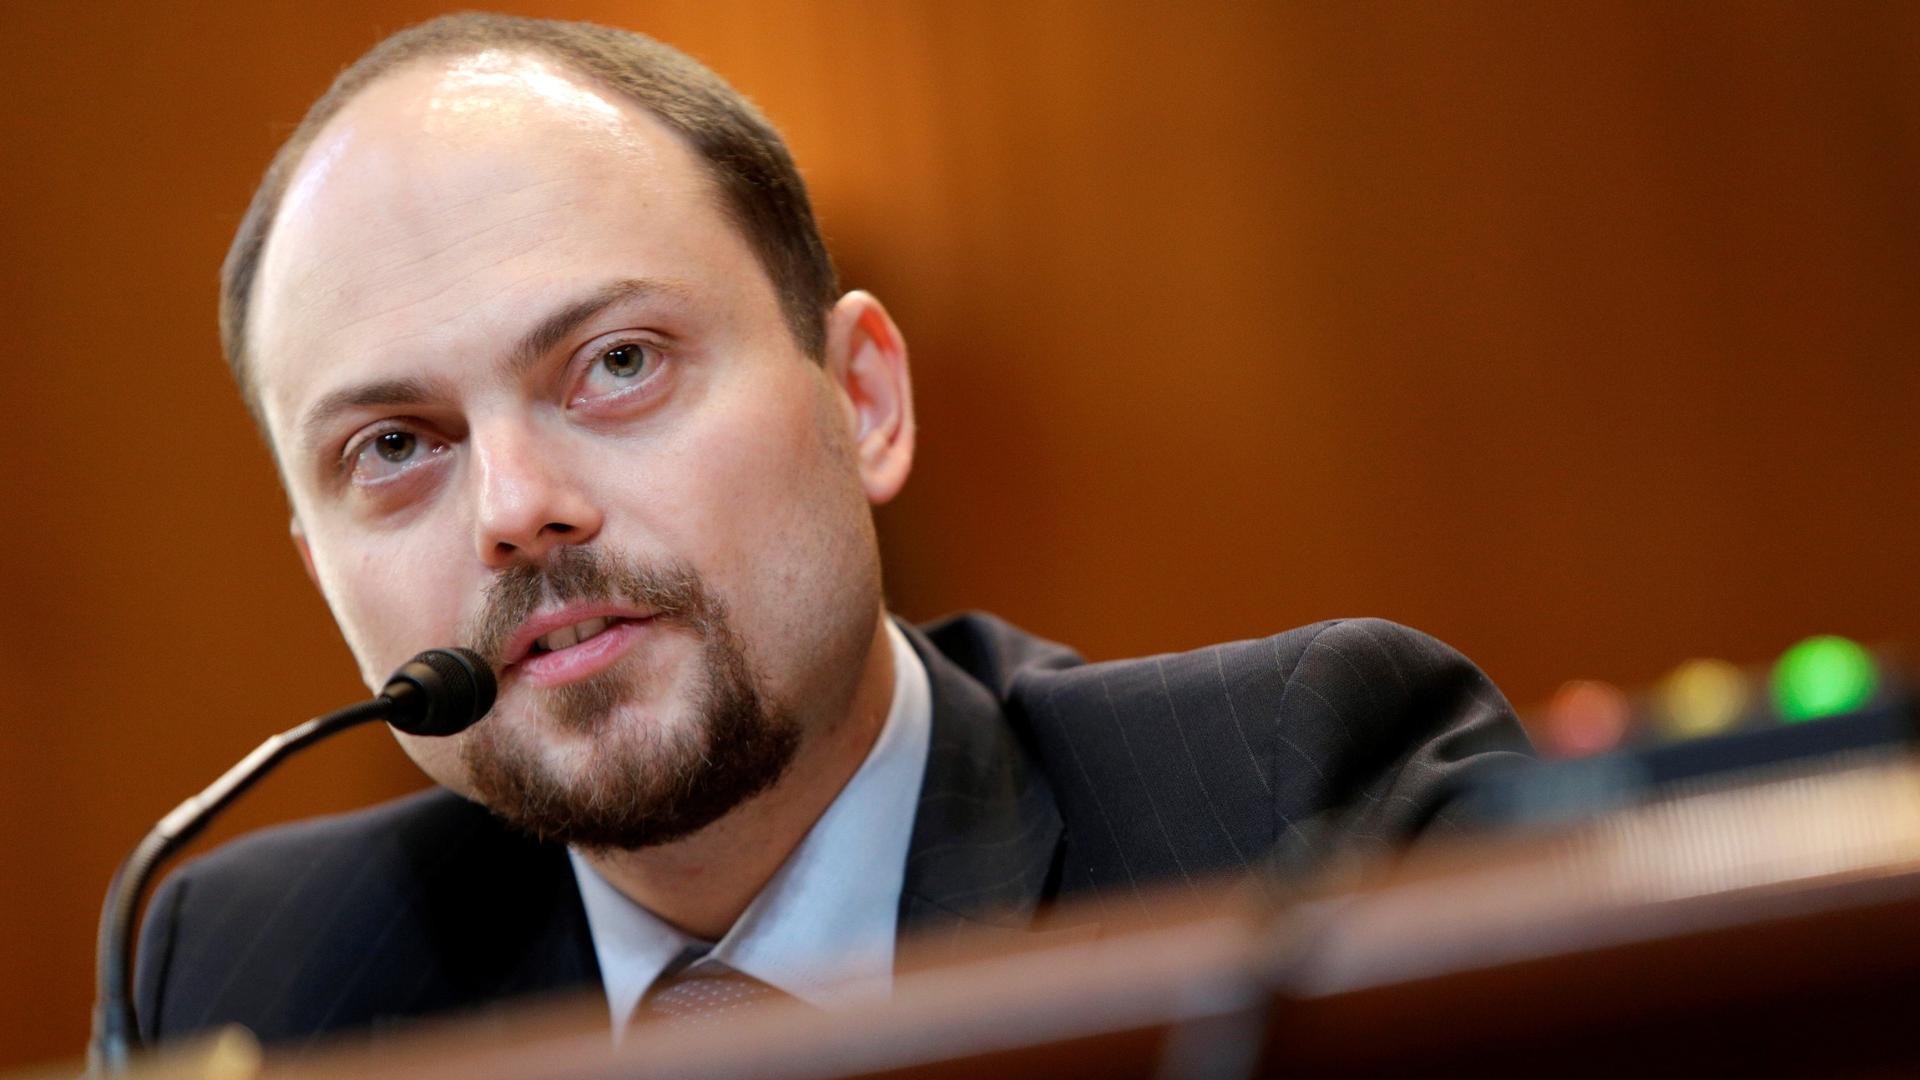 In this file photo, Russian opposition leader Vladimir Kara-Murza, vice chairman of Open Russia, testifies before the Senate Appropriations subcommittee on State, Foreign Operations and Related Programs about "Civil Society Perspectives on Russia" on Capi